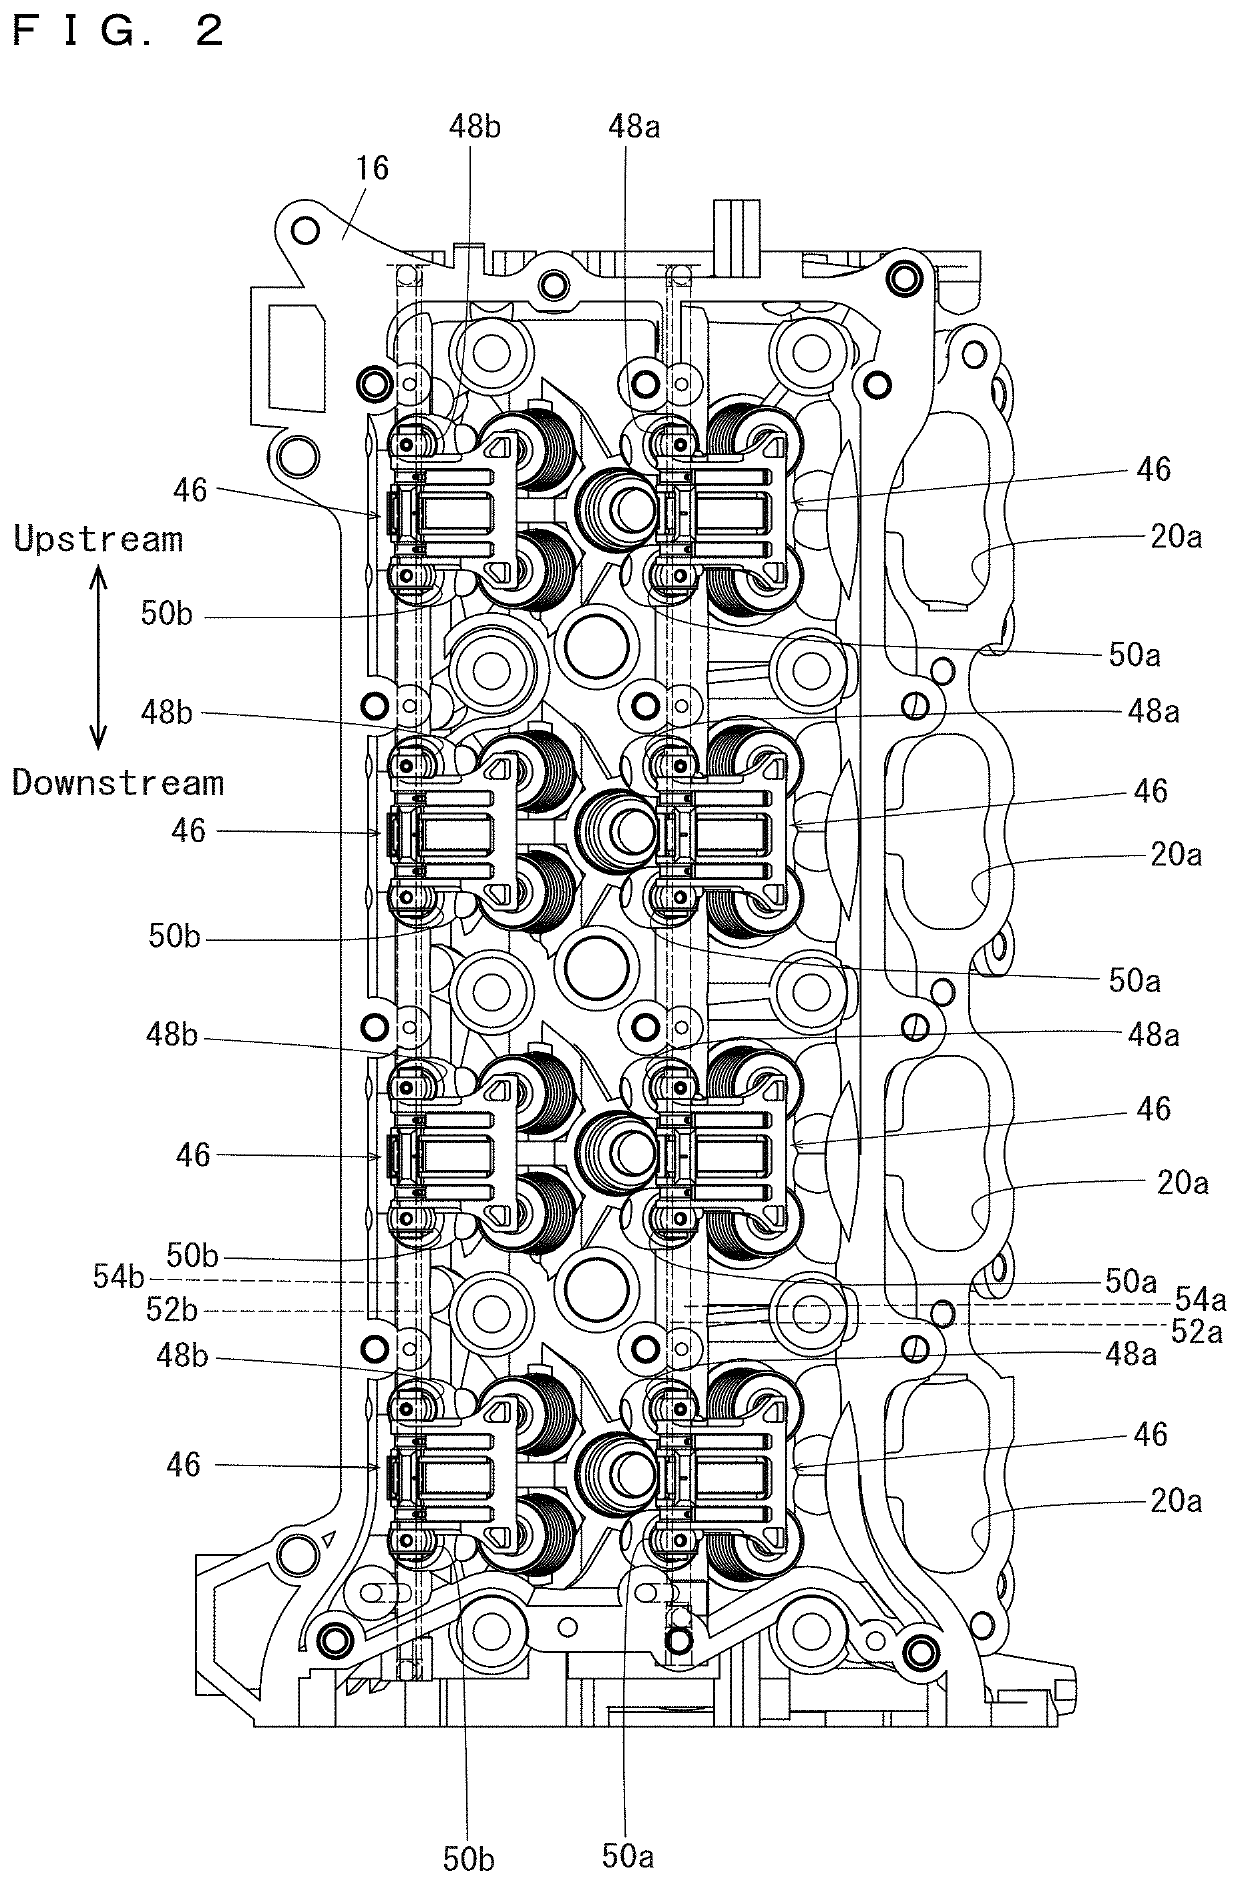 Valve gear and engine